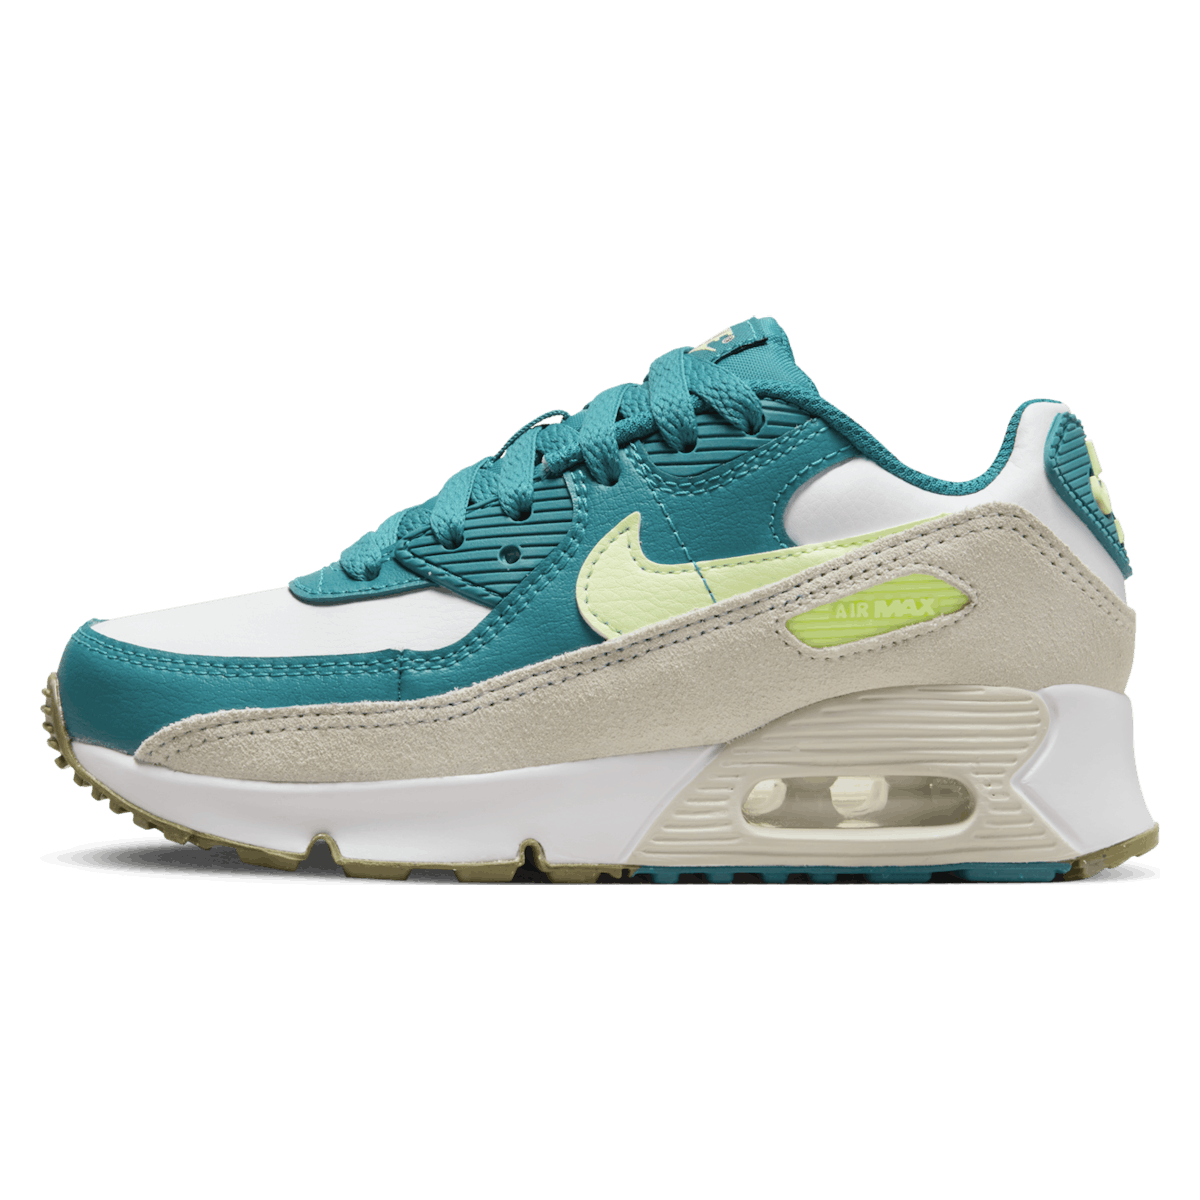 Nike Air Max 90 LTR PS "Bright Spruce"